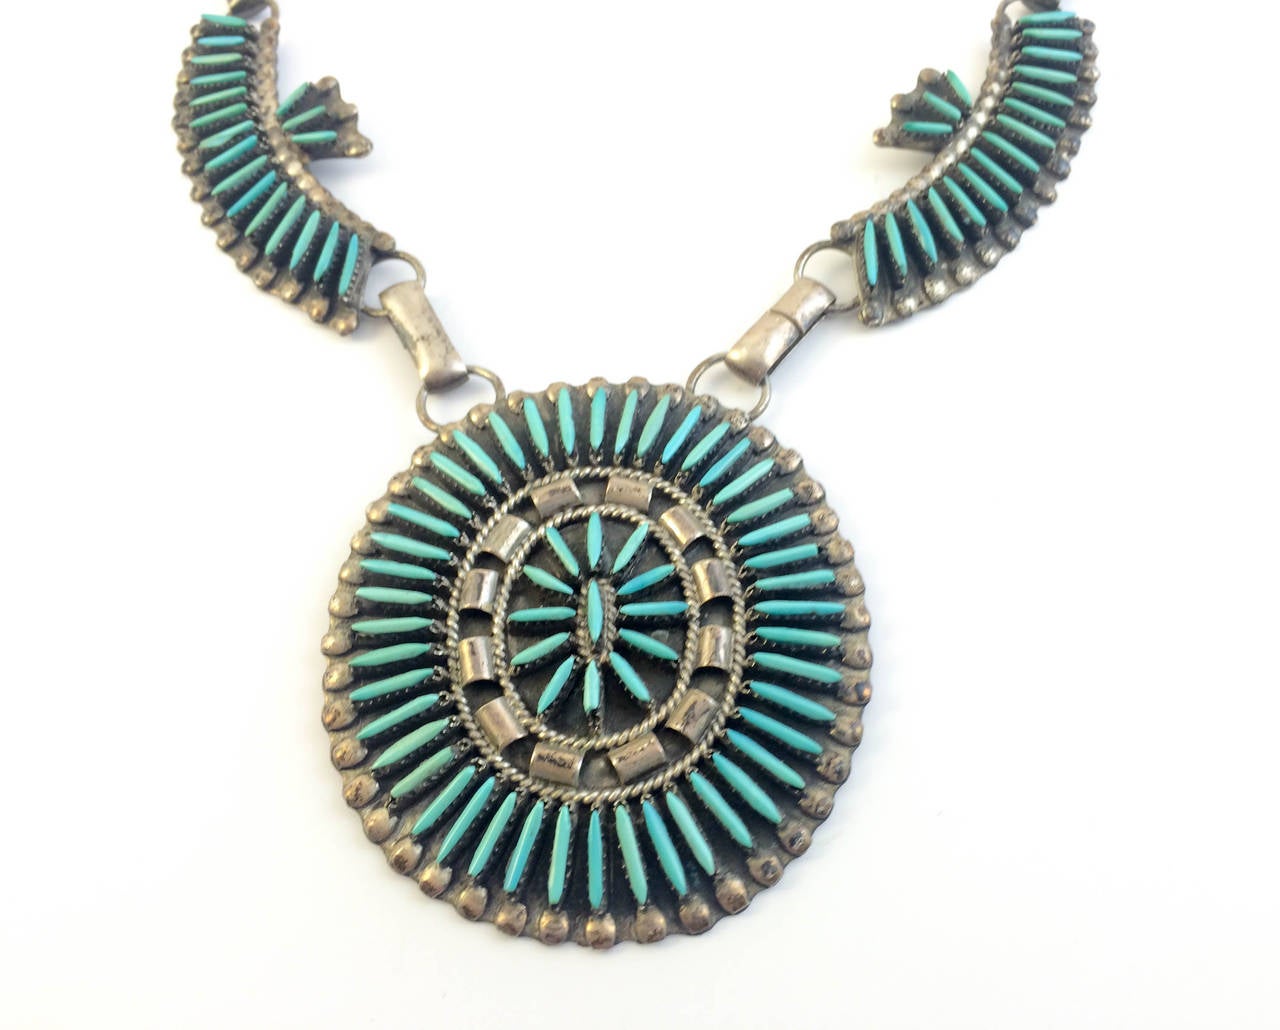 Stylish Native American Silver and Turquoise Necklace. The Zuni Native American design by Dewey & Janet Ghahate on silver features various needle point turquoise stones. This is beautiful and classic example of Native American jewelry.

